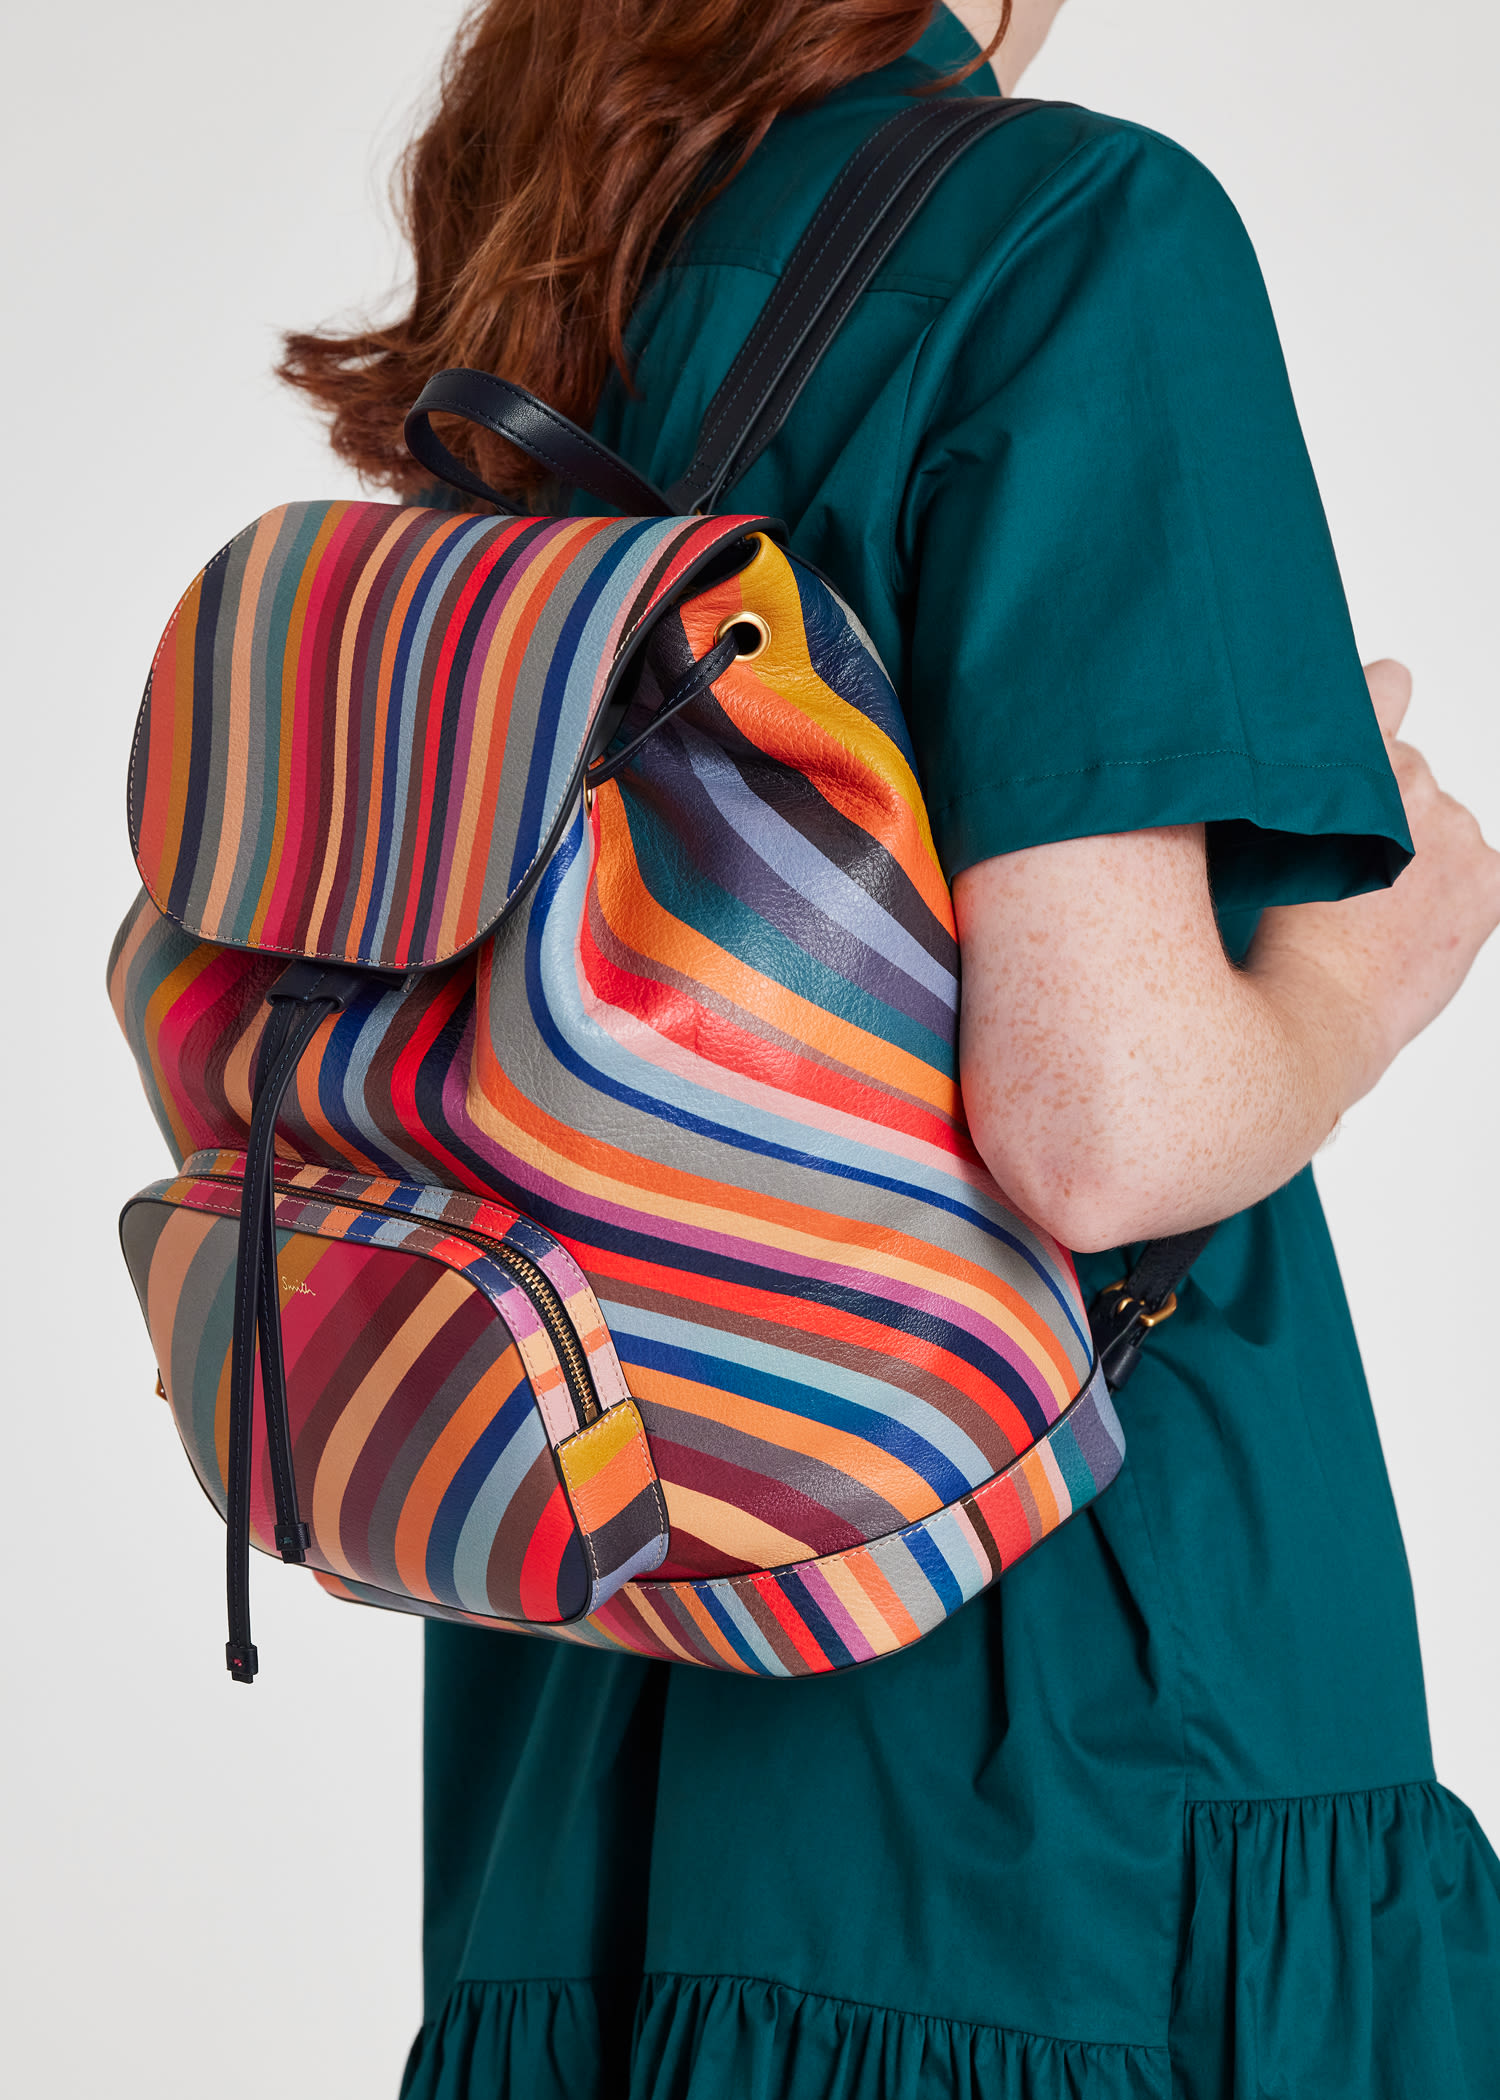 Backpacks Paul Smith - Swirl backpack in multicolor - W1A5278BSWIRL90